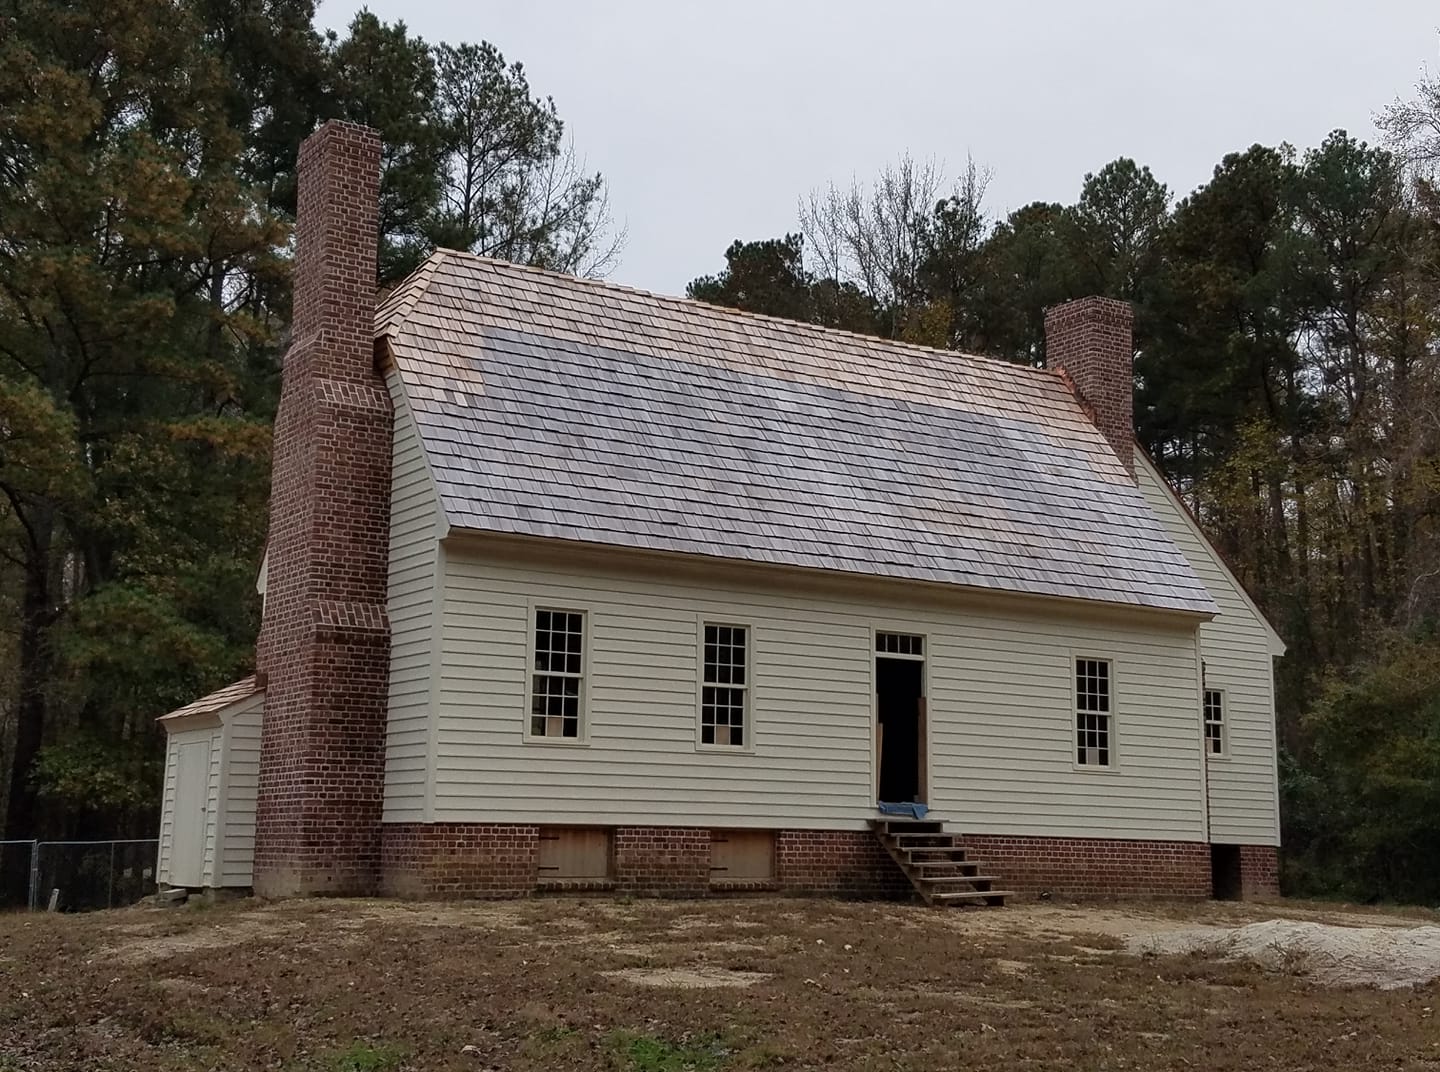 James Monroe Birthday Celebration and Grand Opening of the Memorial Home